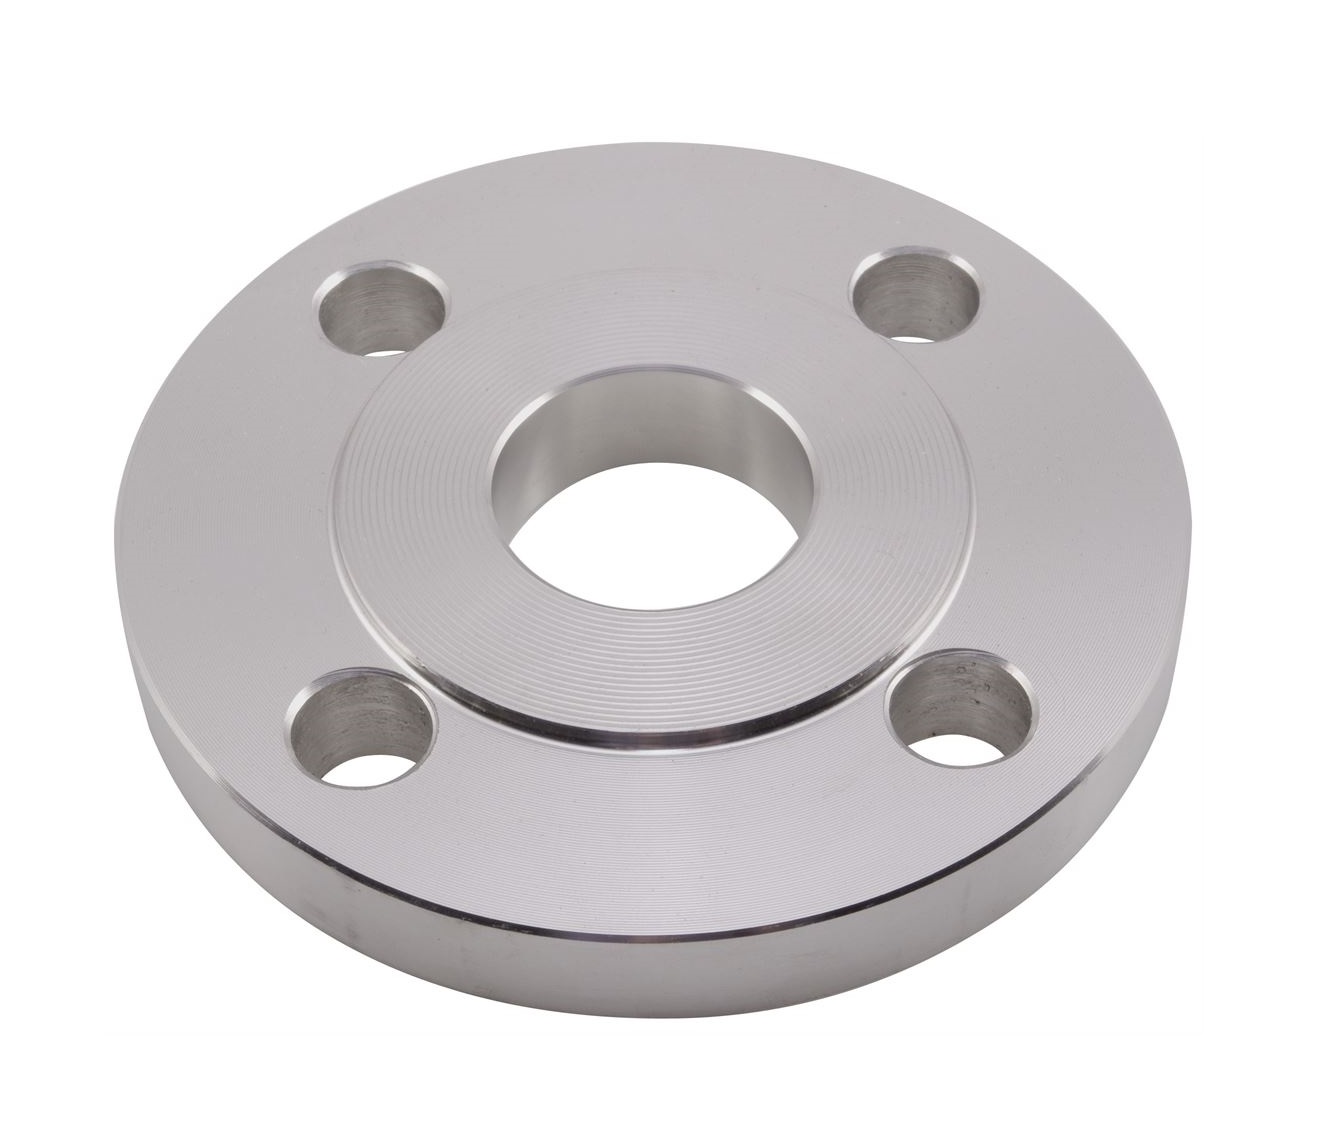 Stainless Steel L Pipe Flanges Ss Slip On Flanges Steel My Xxx Hot Girl 